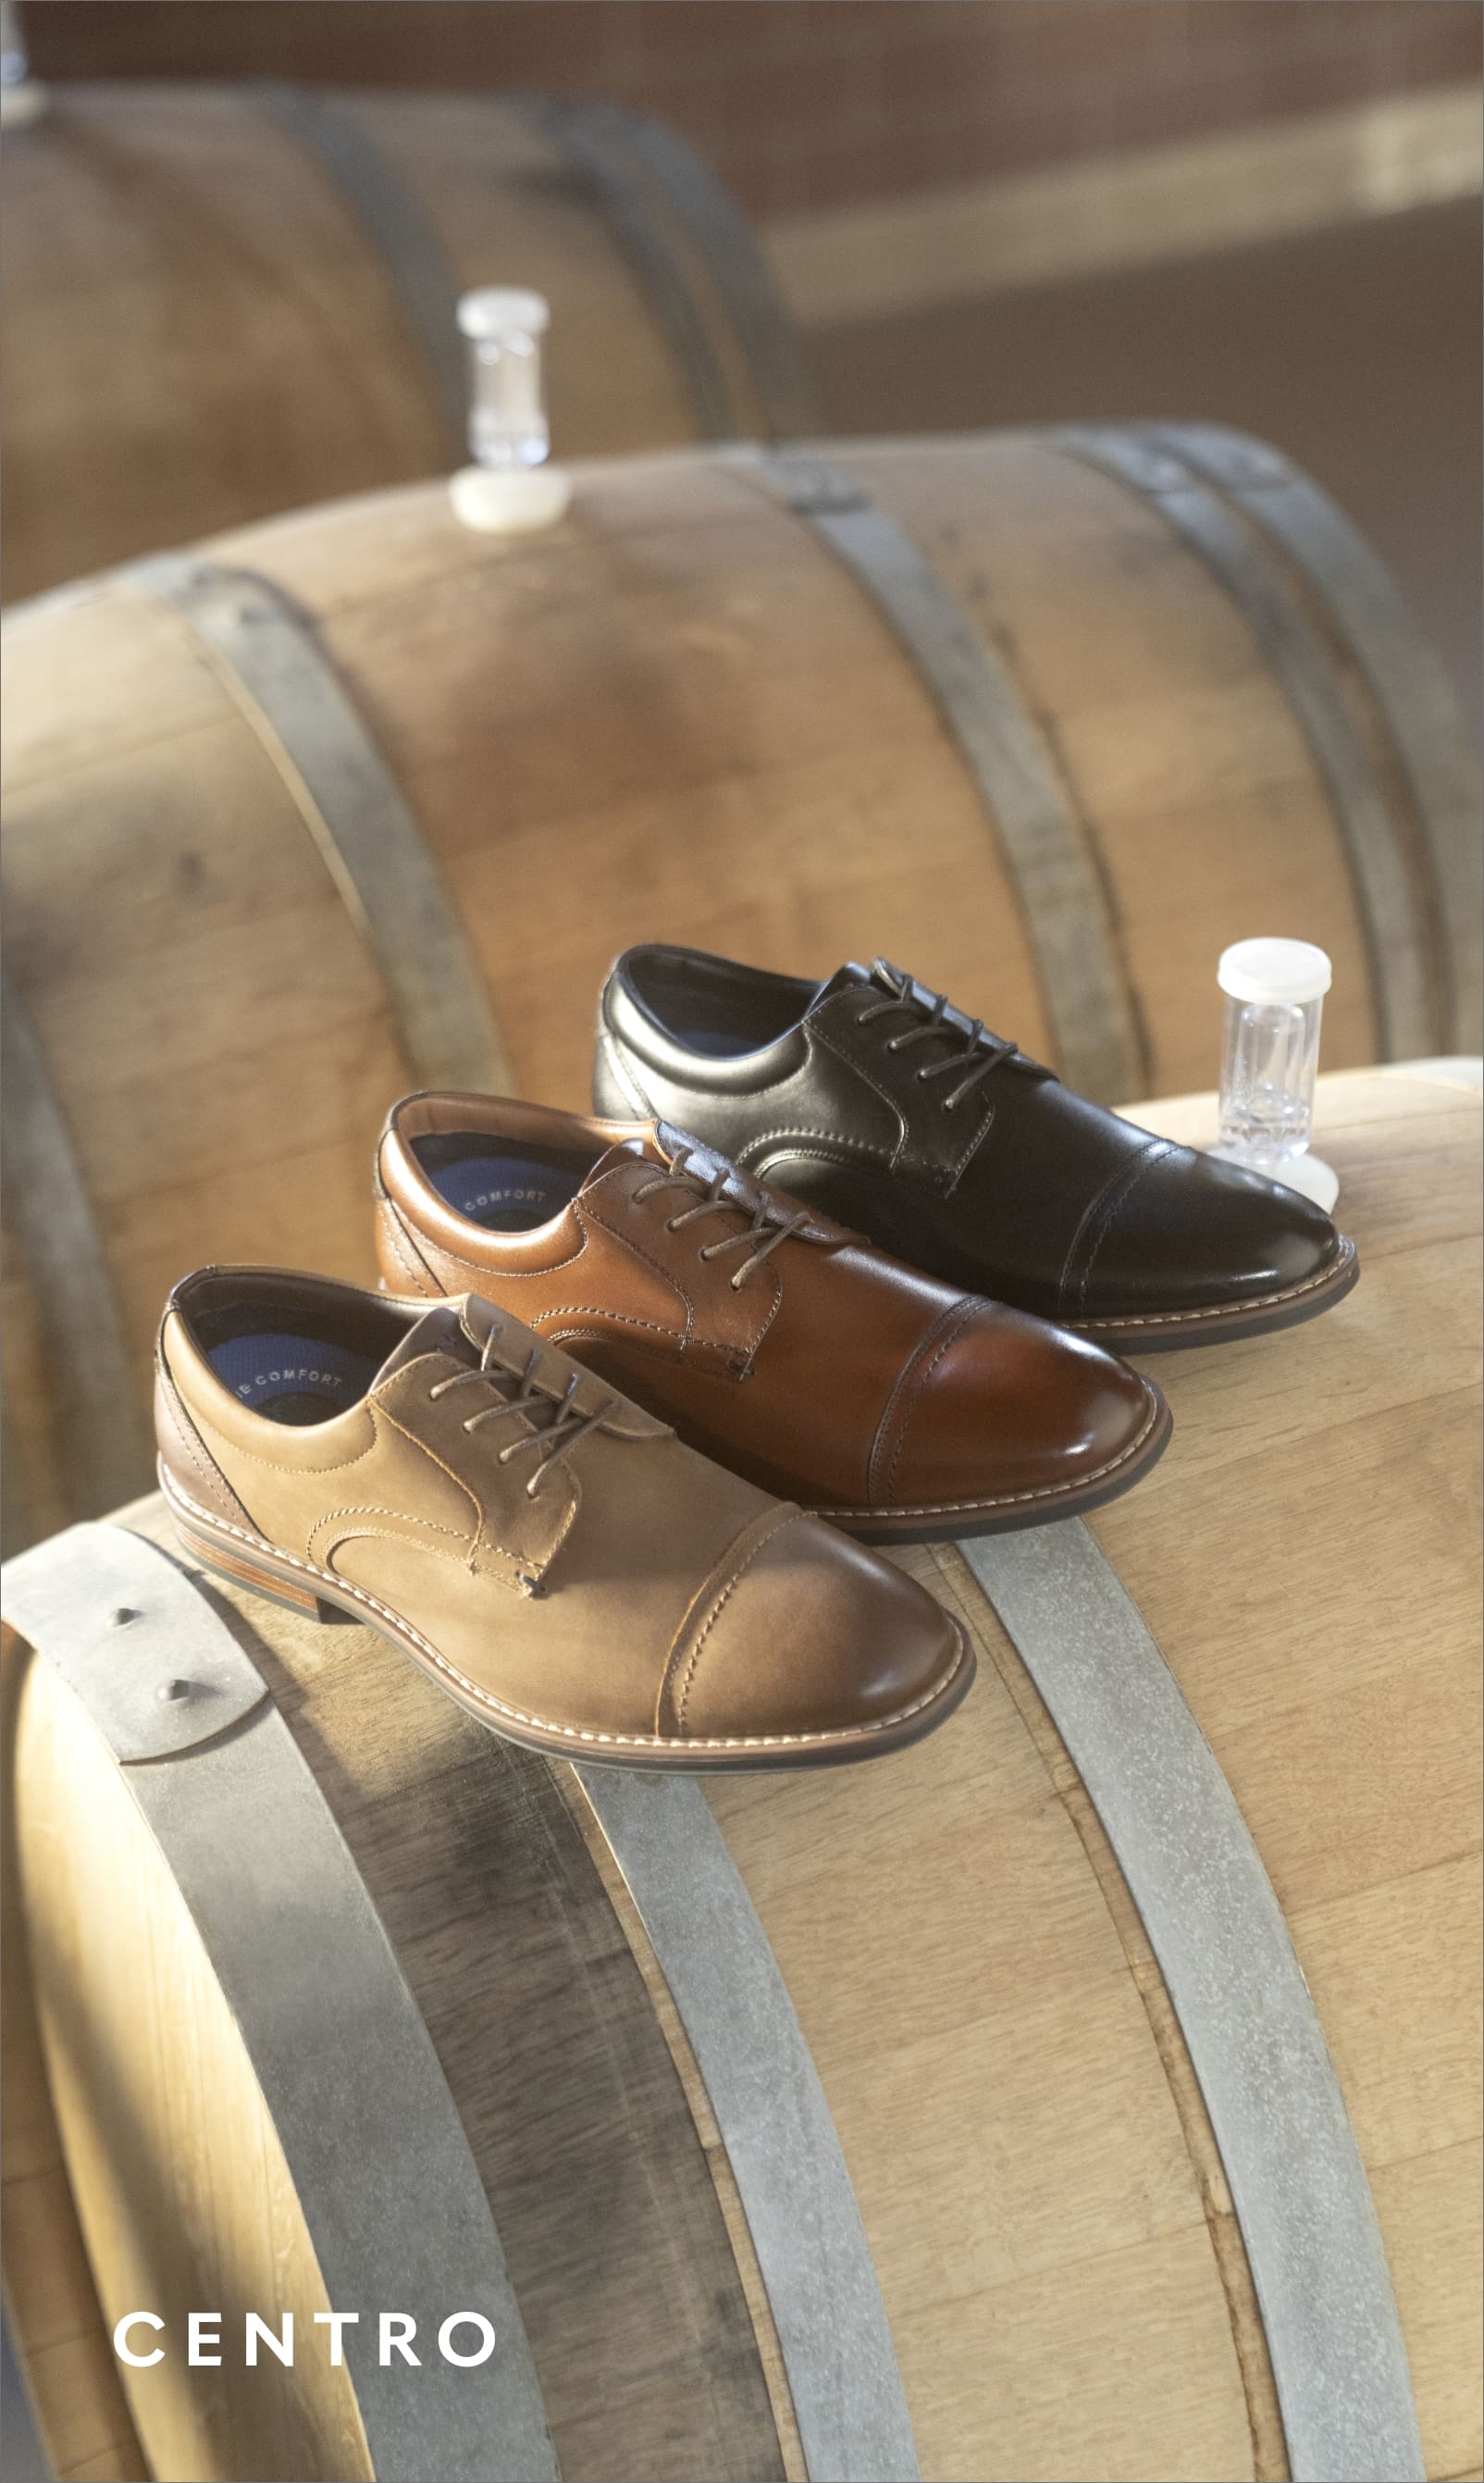 Men's Dress Shoes category. Image features the Centro Cap Toe oxford in cognac.